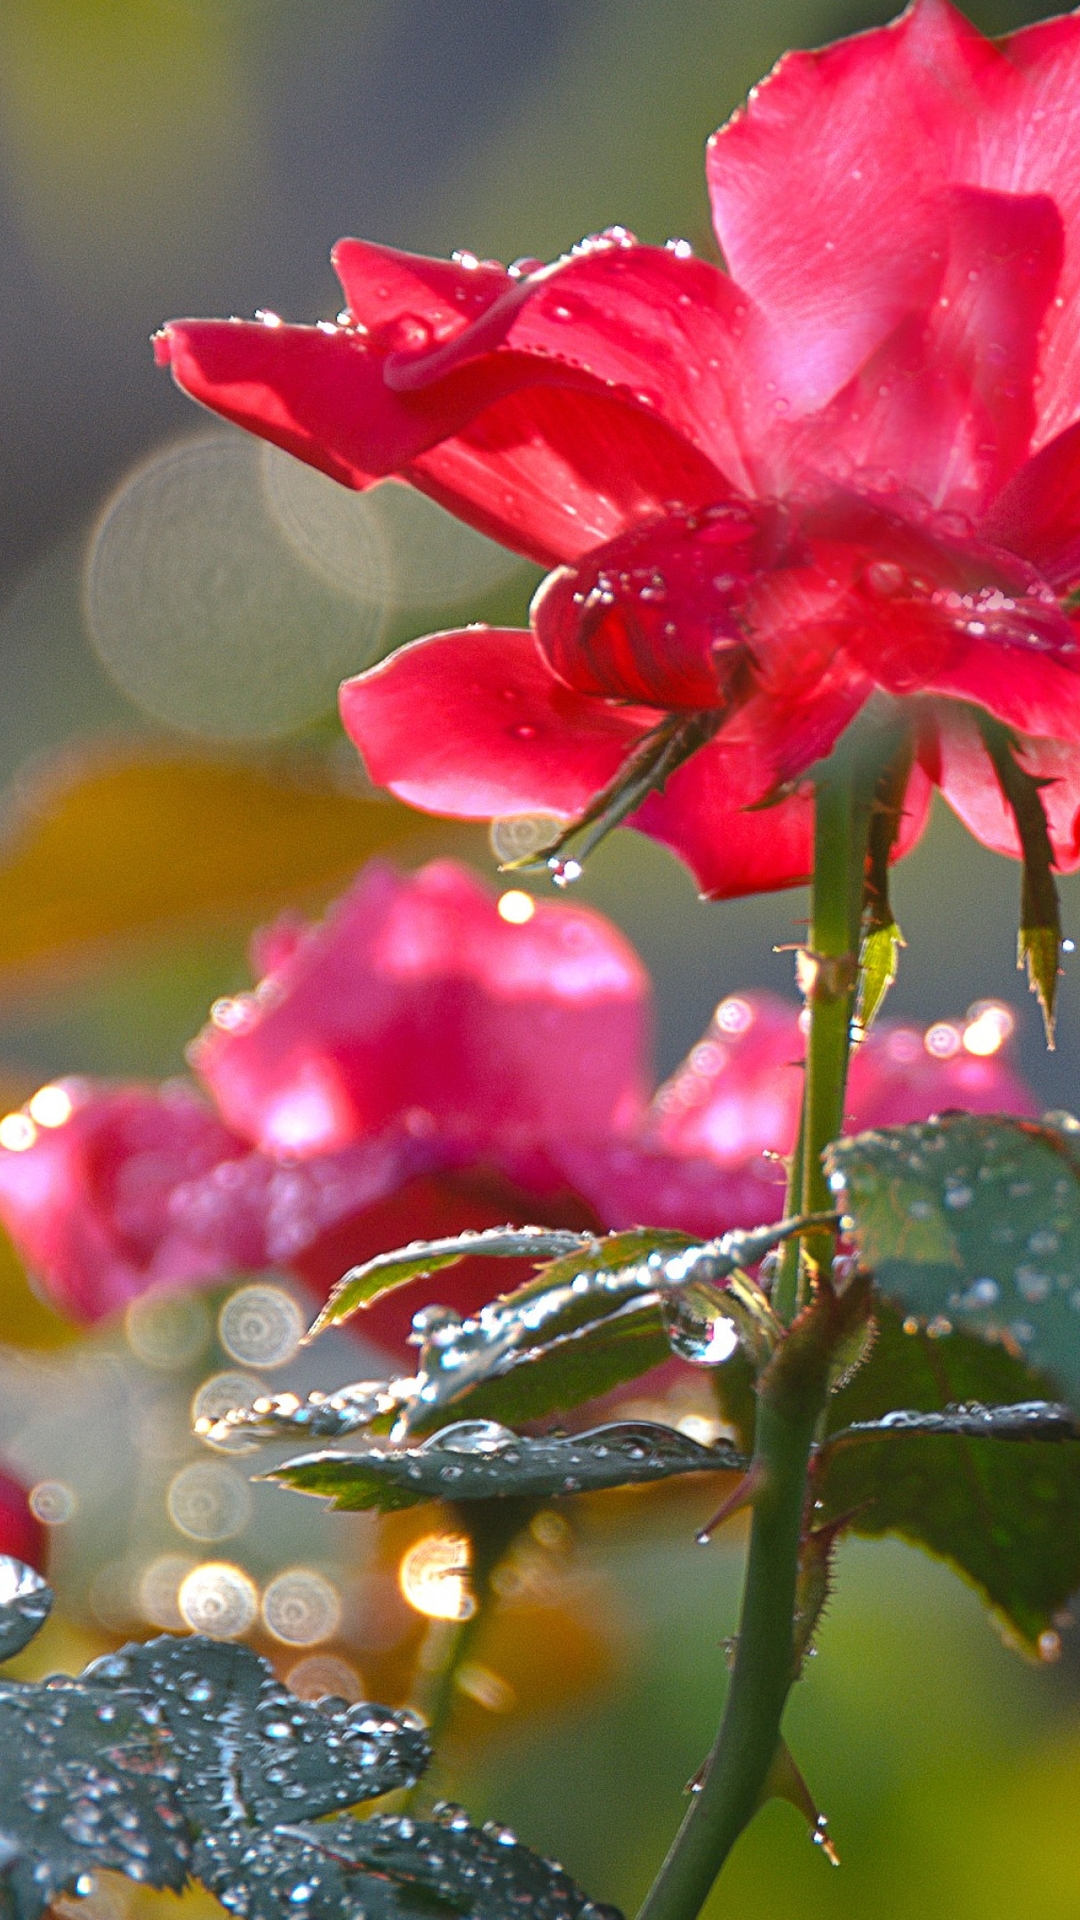 Image: Flower, red, stem, leaves, spikes, drops